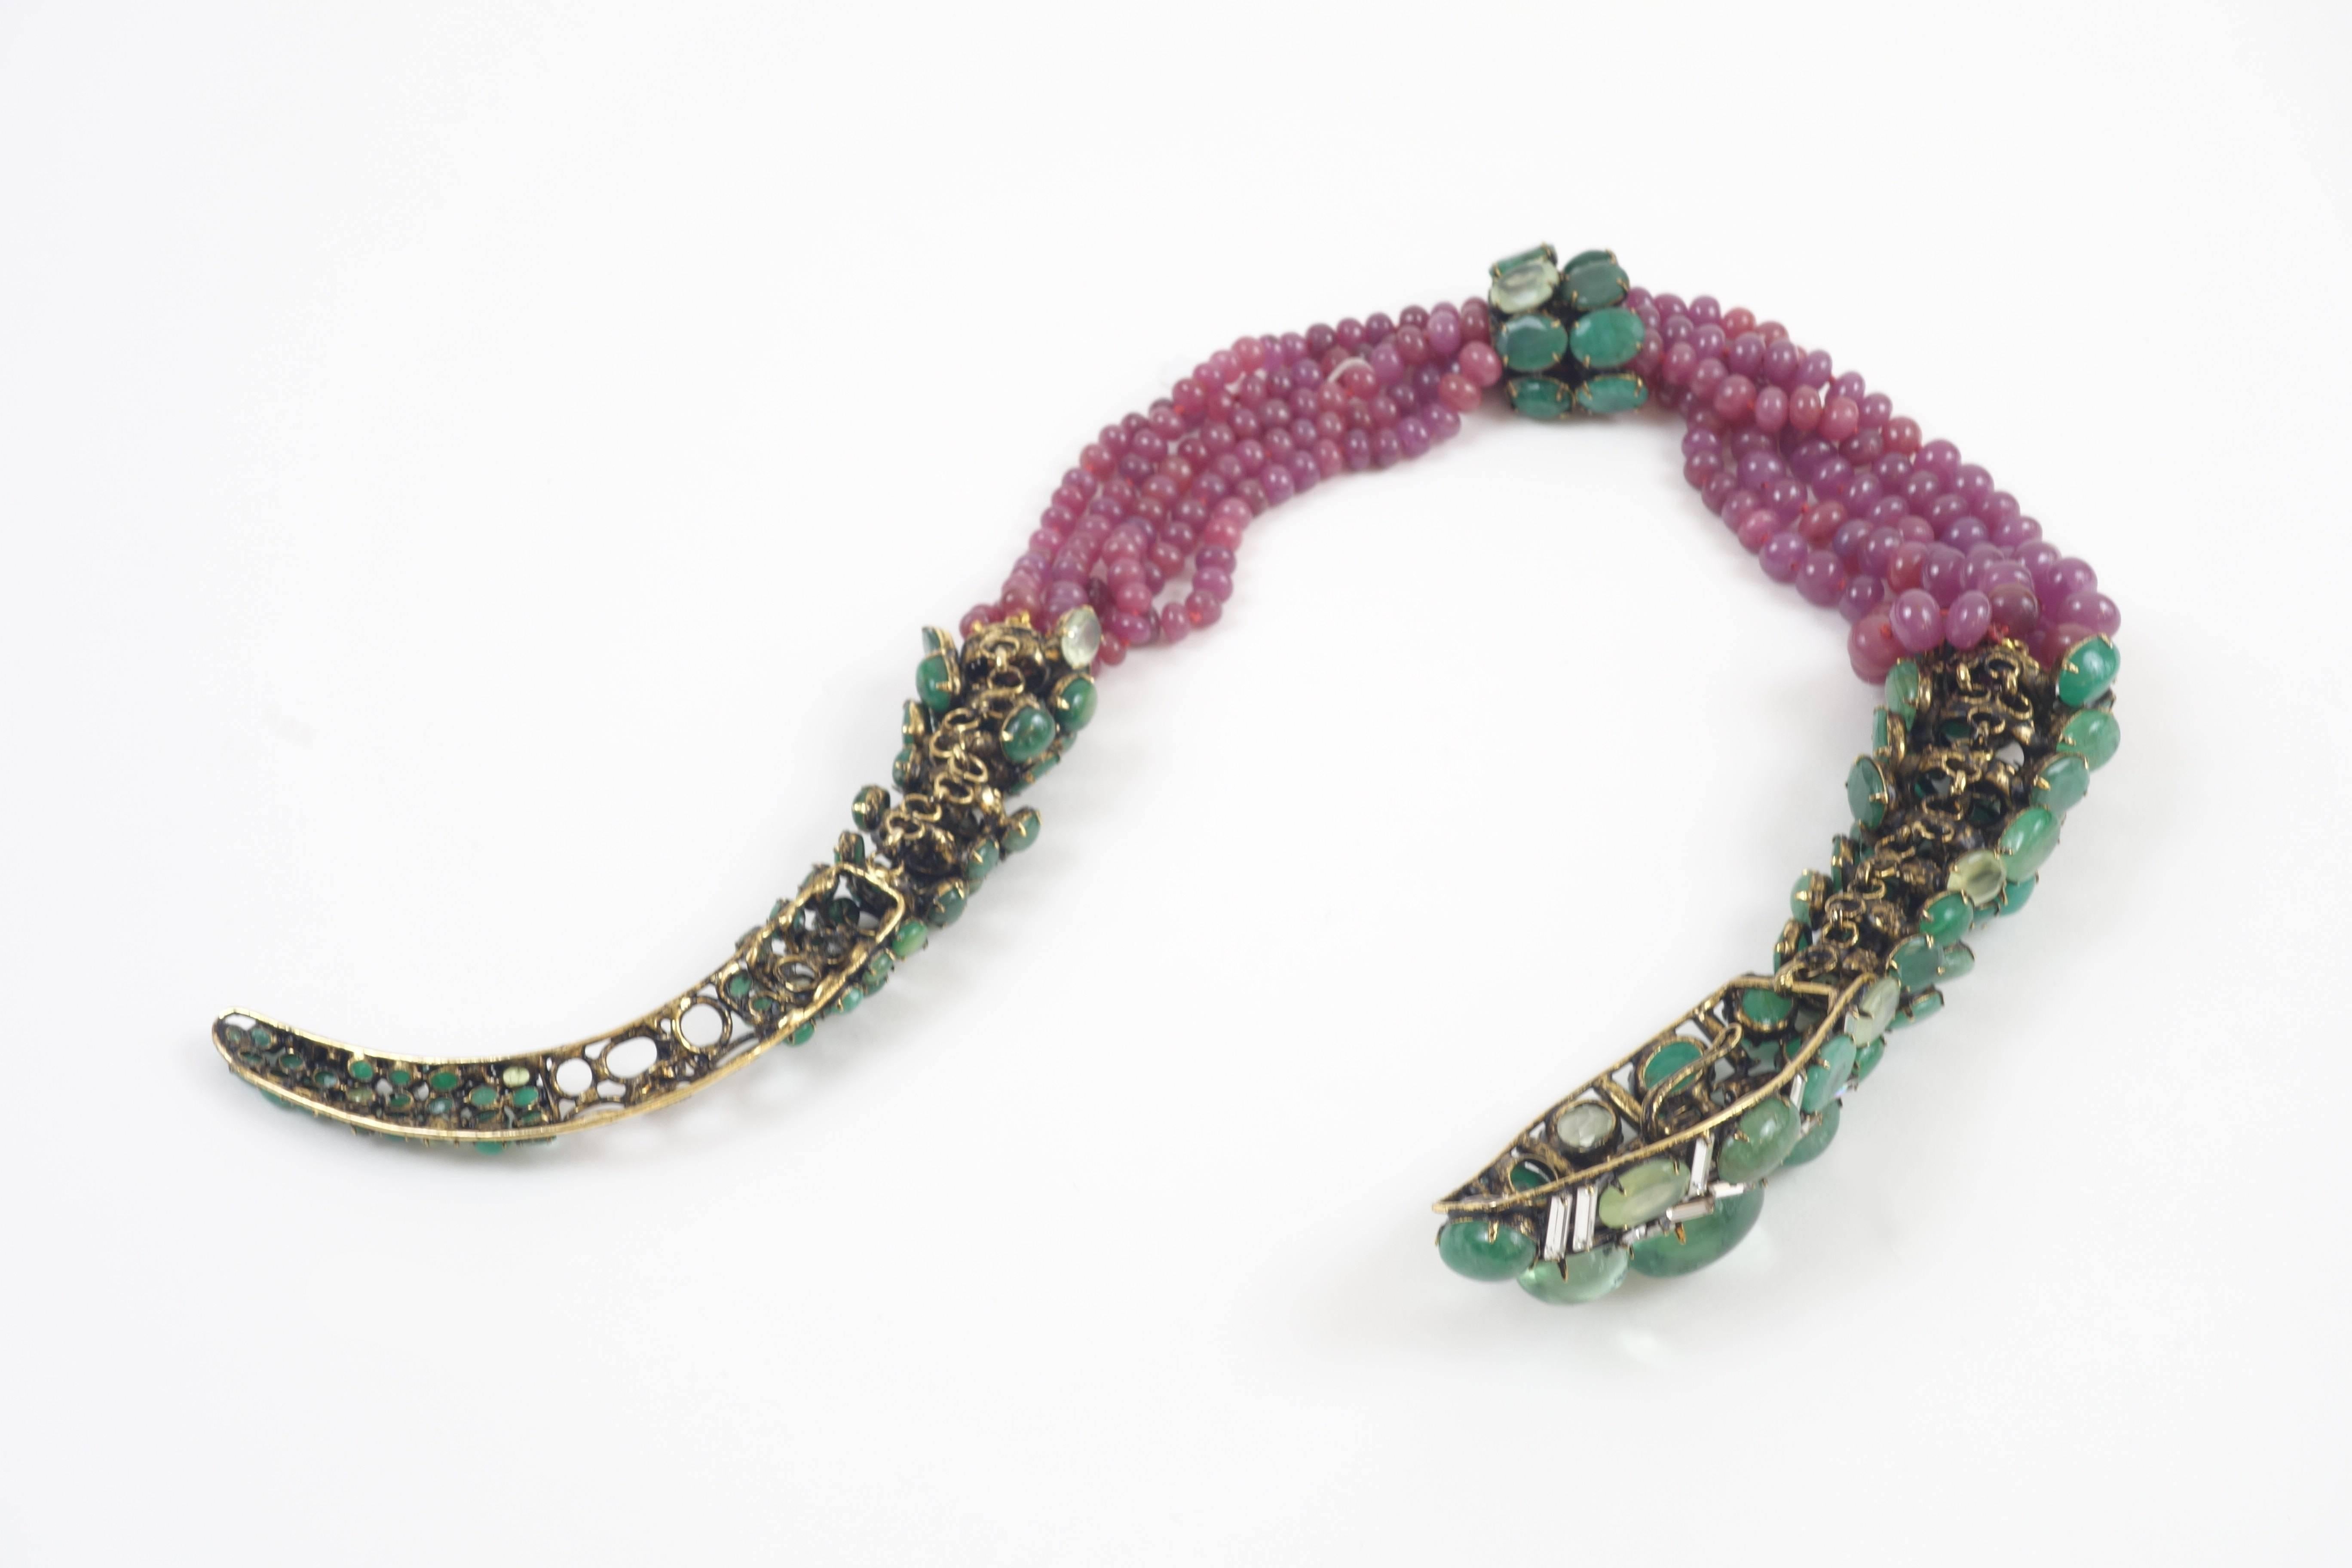 Contemporary Necklace by Iradj Moini, with a Blend of Emerald, Ruby and Swarovski Crystal